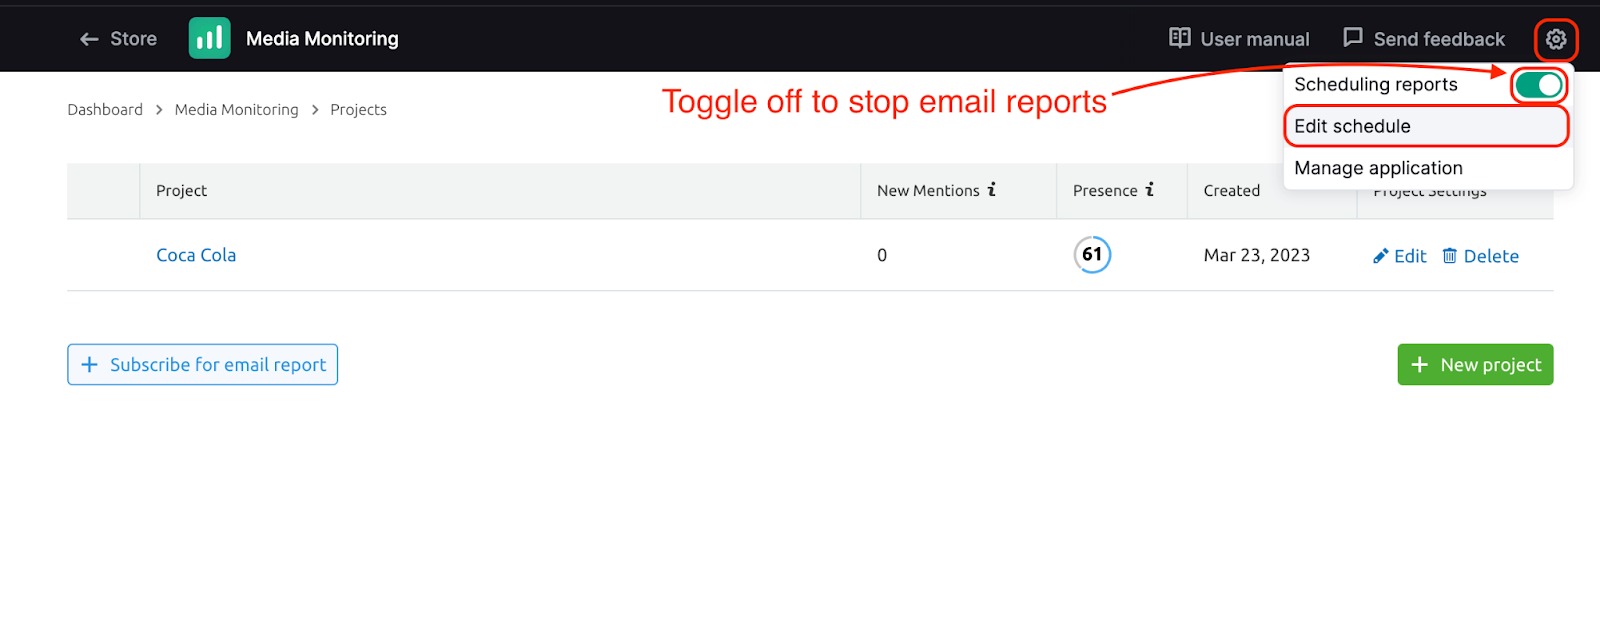 The cog icon that allows users to stop email reports and change the schedule is highlighted with red colour in the top-right corner of the interface. 